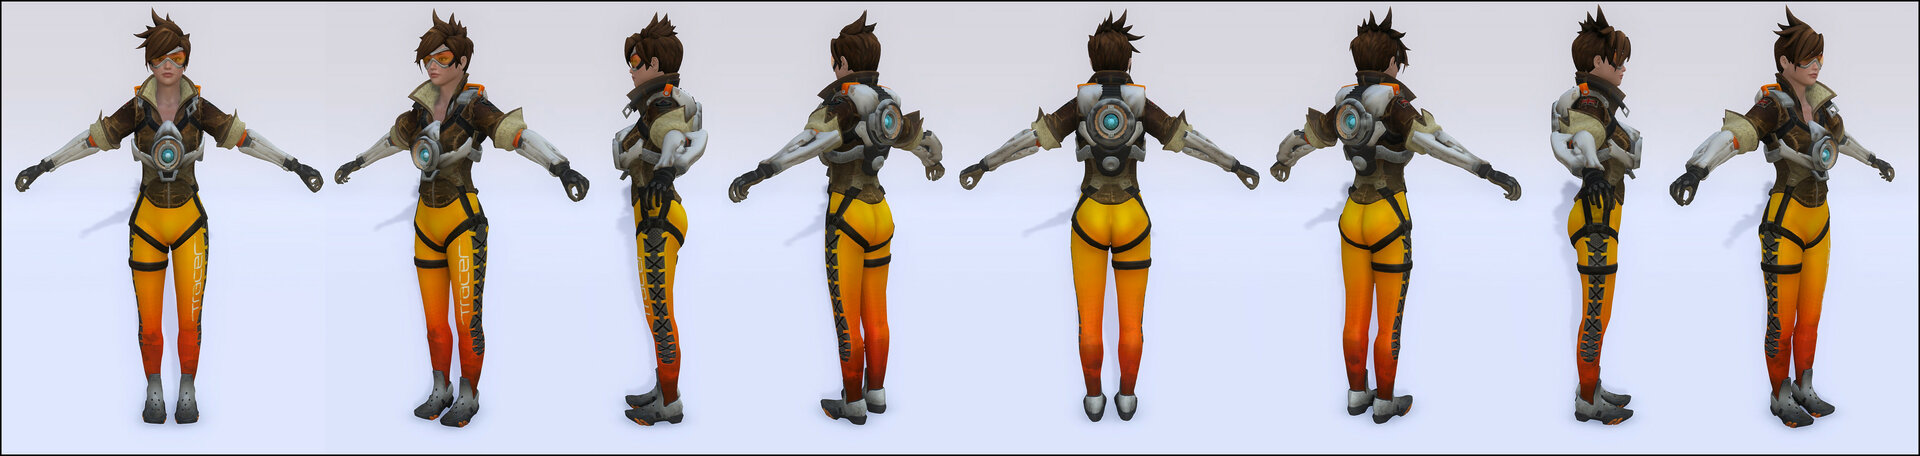 NC - Tracer Outfit - Update 2.jpg